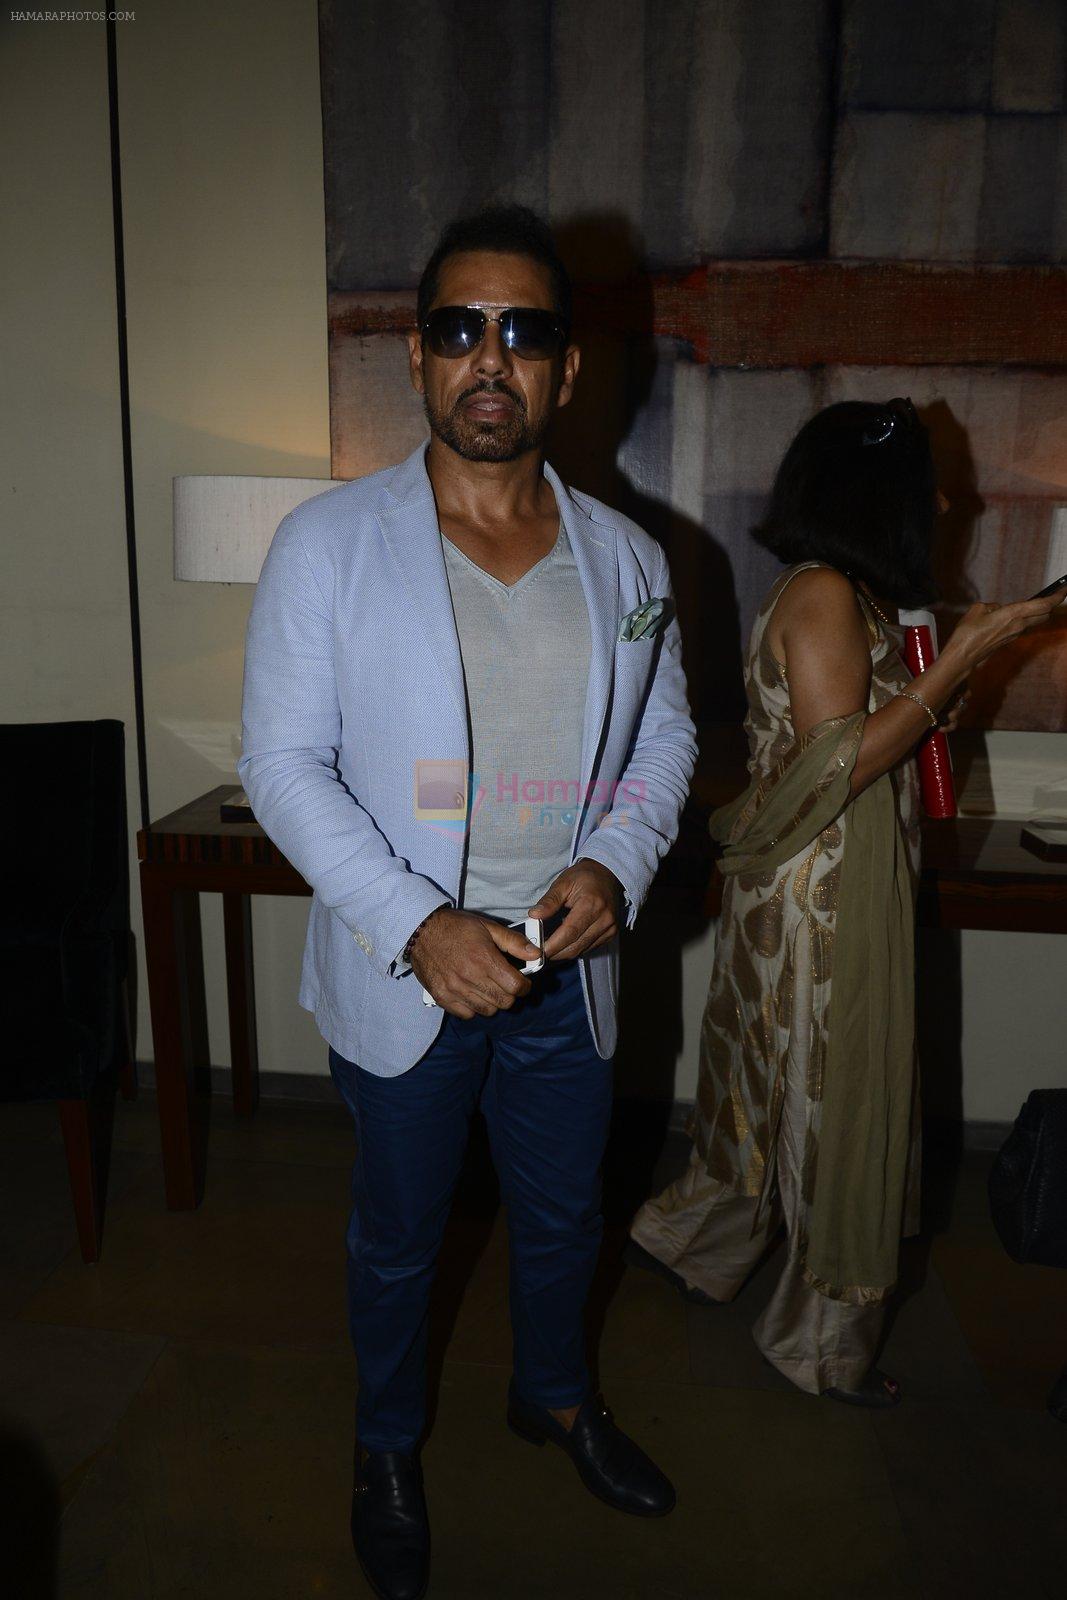 Robert Vadra during Manav Gangwani latest collection Begum-e-Jannat at the FDCI India Couture Week 2016 on 24 July 2016